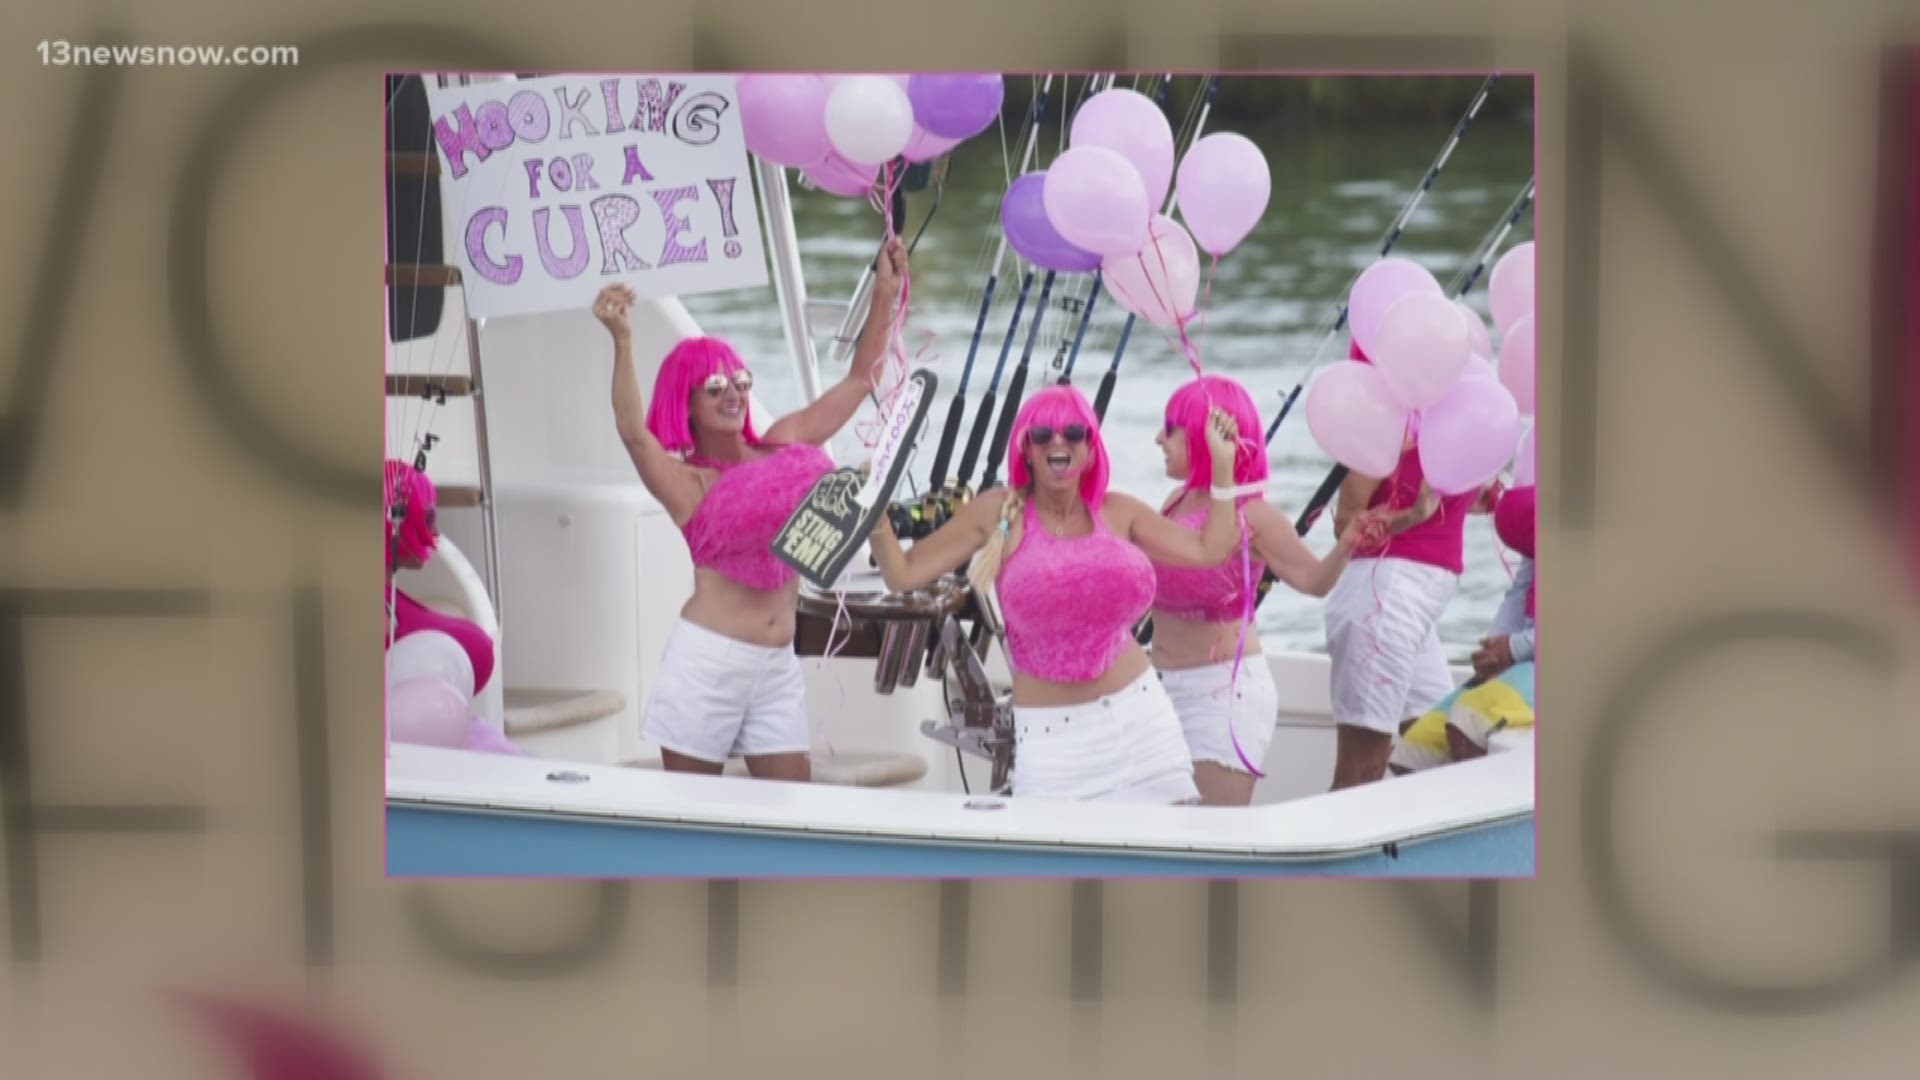 The 17th Annual Wine, Women & Fishing ladies only charity billfish tournament hopes to reel in funds in the fight against breast cancer.